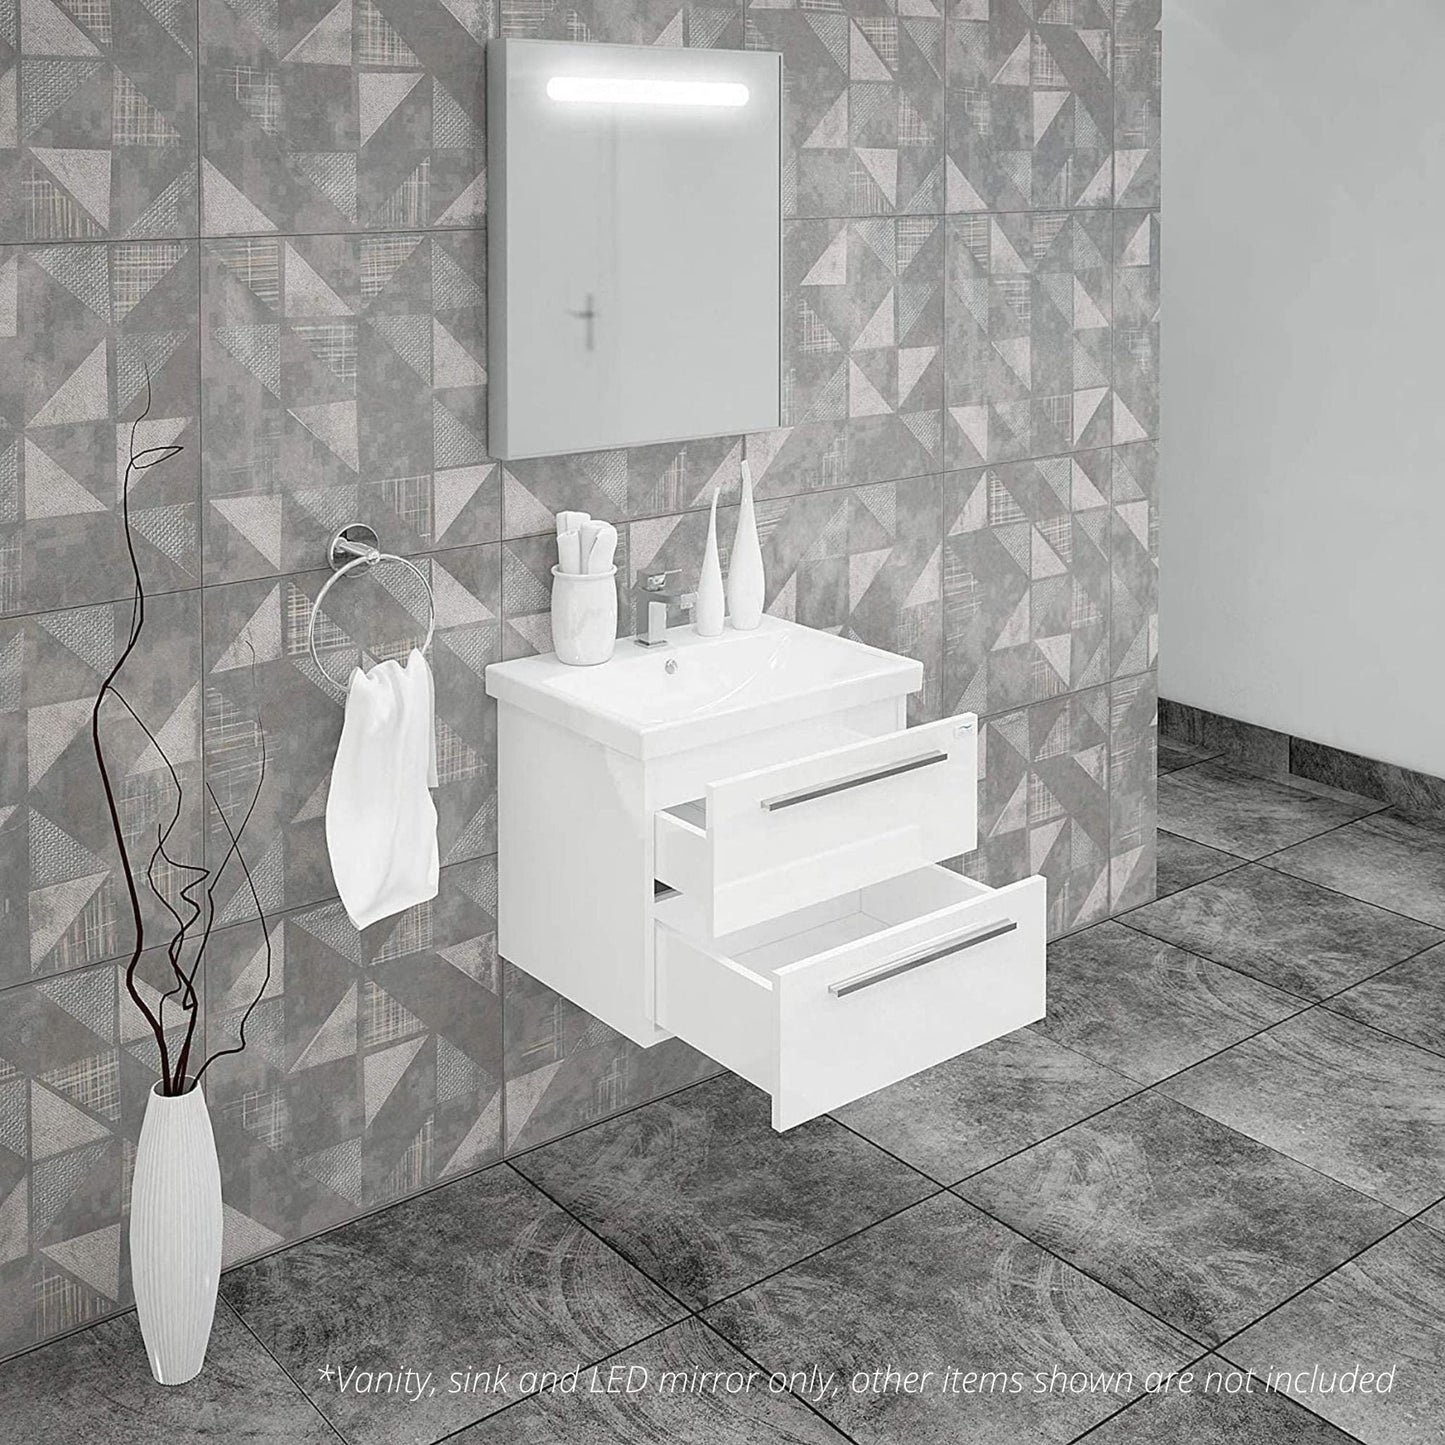 Casa Mare Elke 32" Glossy White Wall-Mounted Bathroom Vanity and Ceramic Sink Combo With LED Mirror